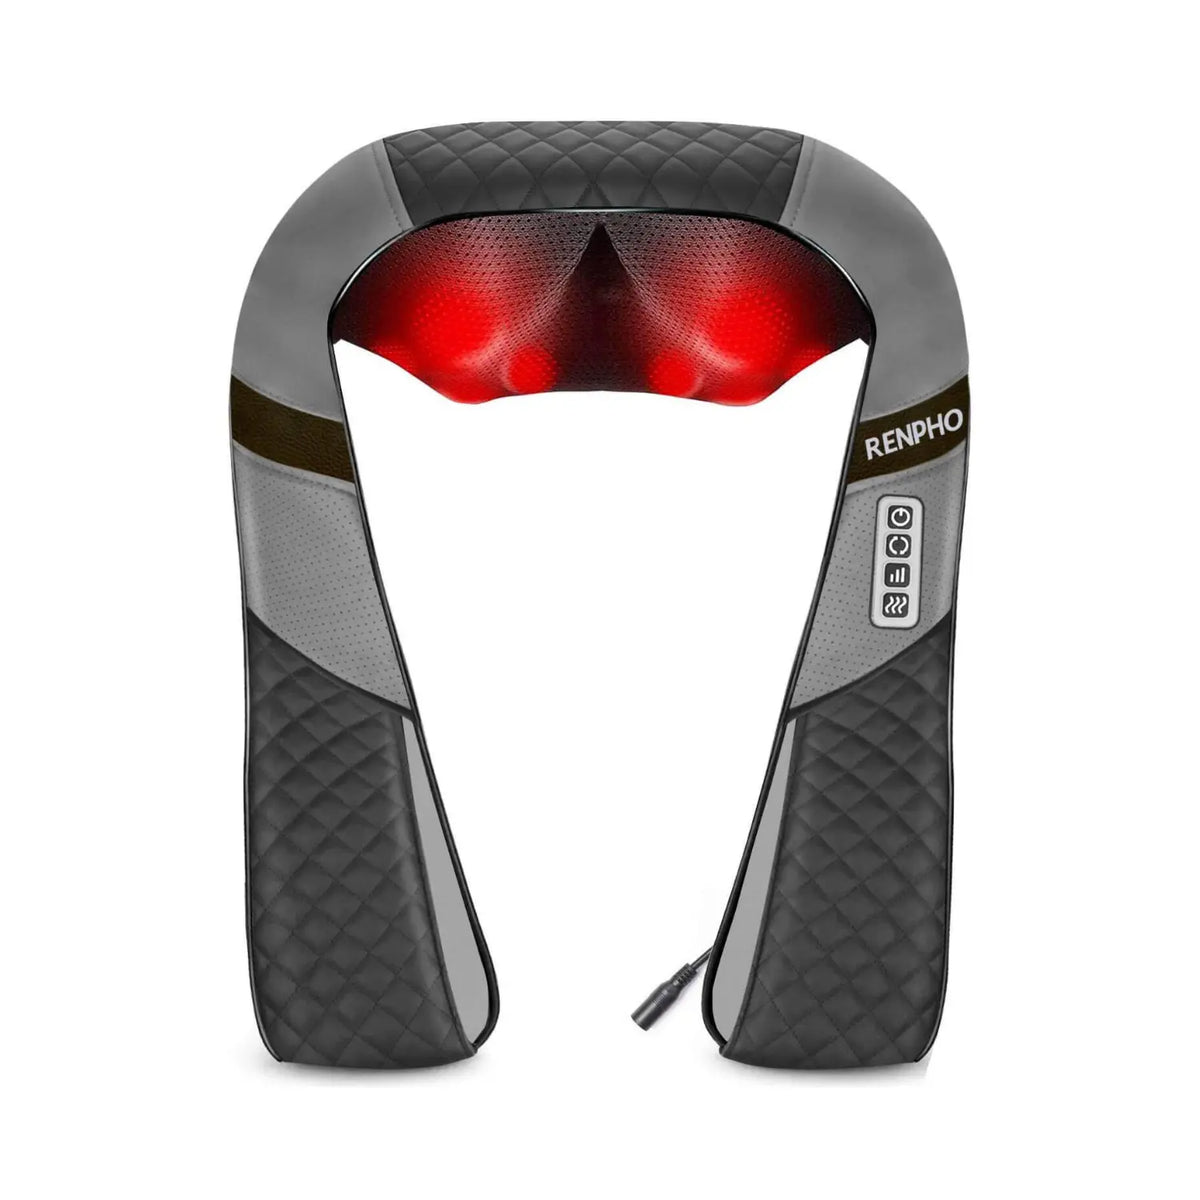 An electric neck and shoulder massager with quilted gray fabric, black accents, and built-in heating, the Renpho EU U-Neck 2 Neck & Shoulders Massager offers a comfortable massage experience. It features buttons for power, mode, and heat settings on the right arm. Four glowing red massage nodes at the top indicate when it is turned on.